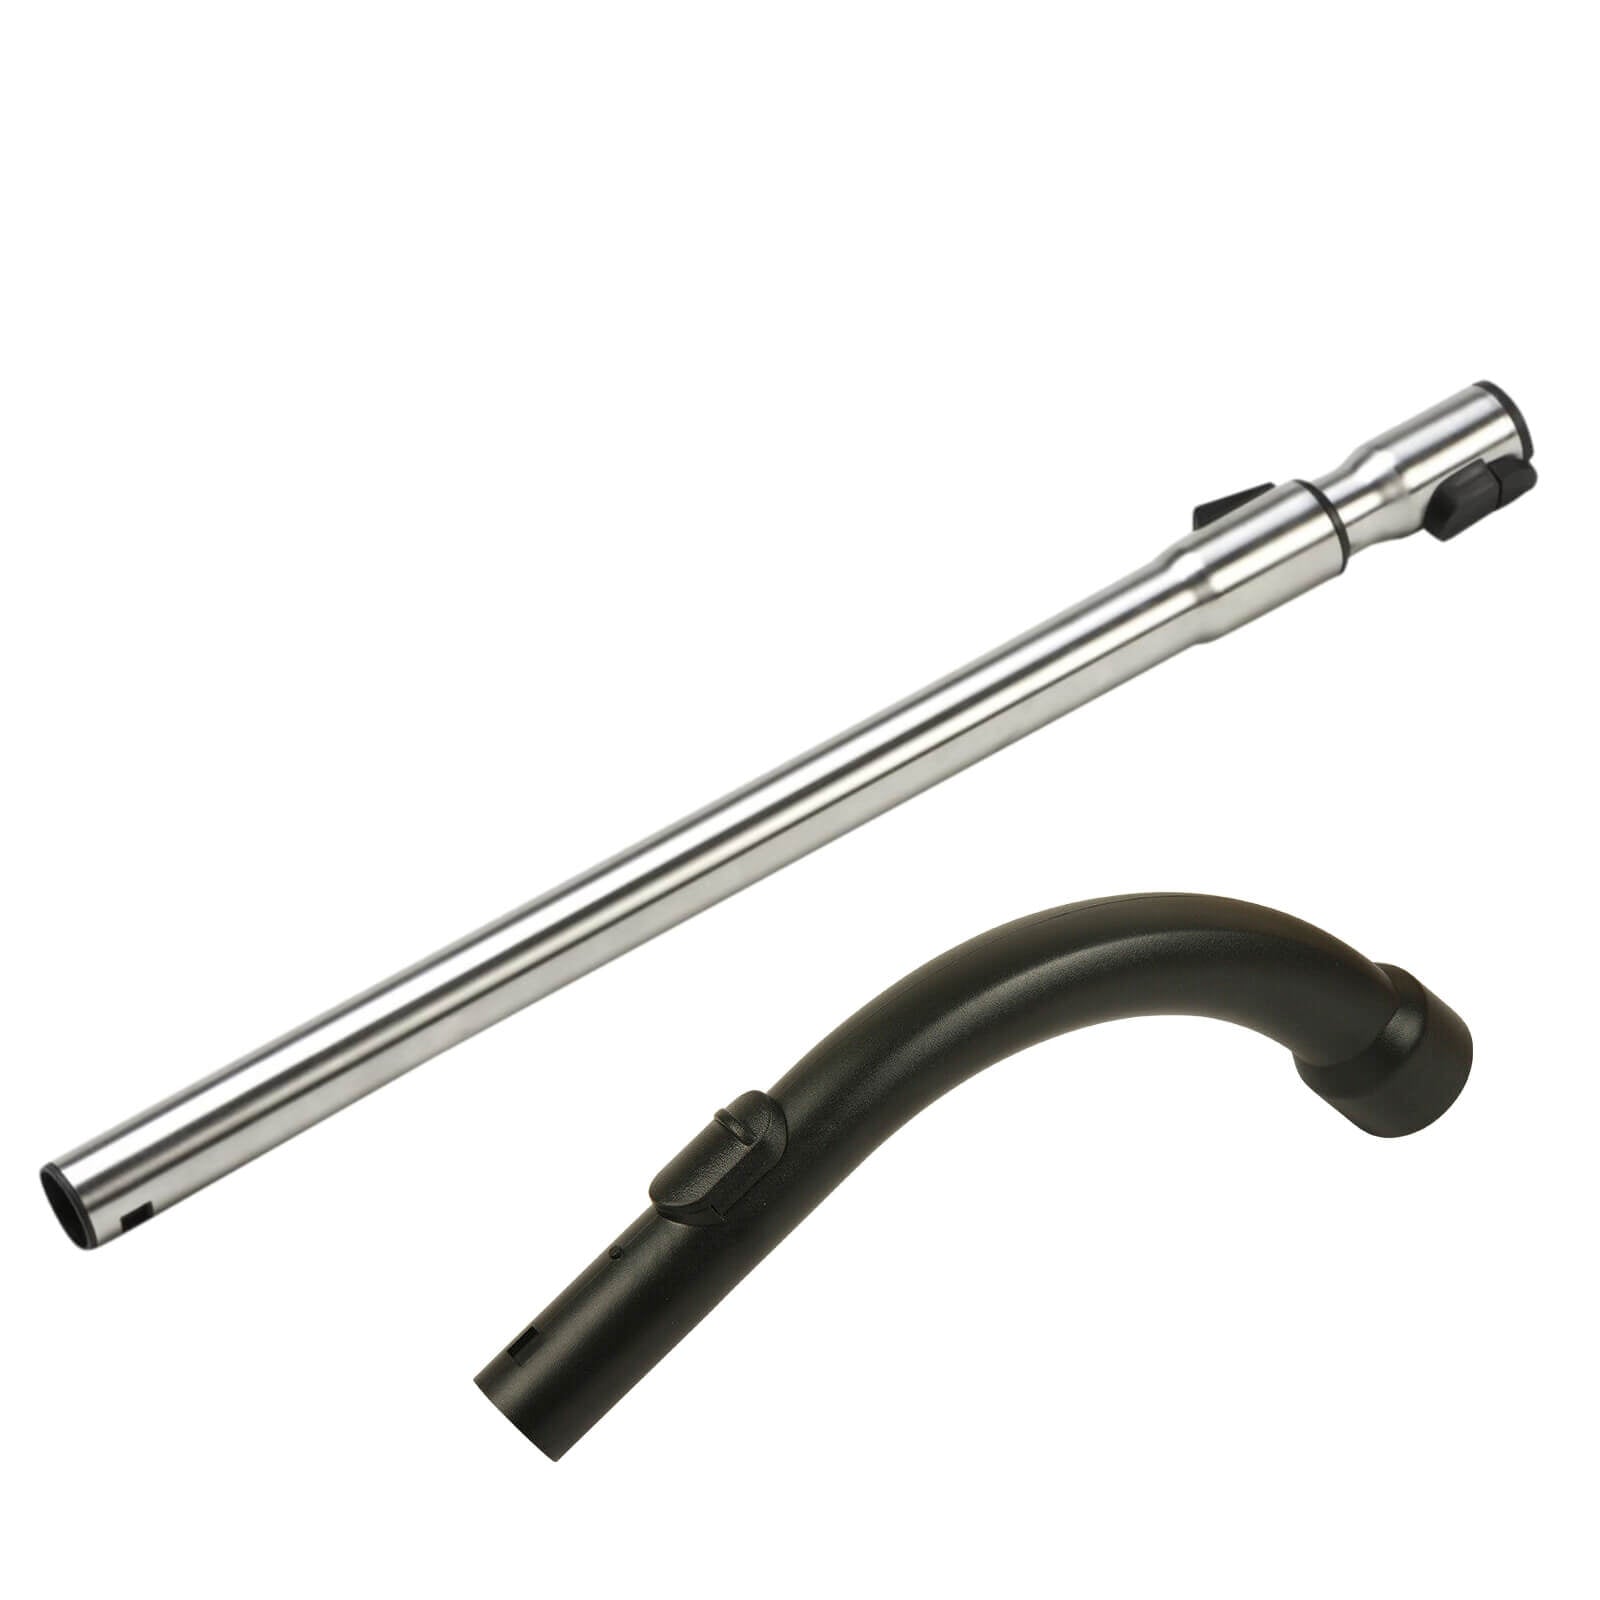 Miele Vacuum Cleaner Extension Rod Tube with Curved Handle Sparesbarn